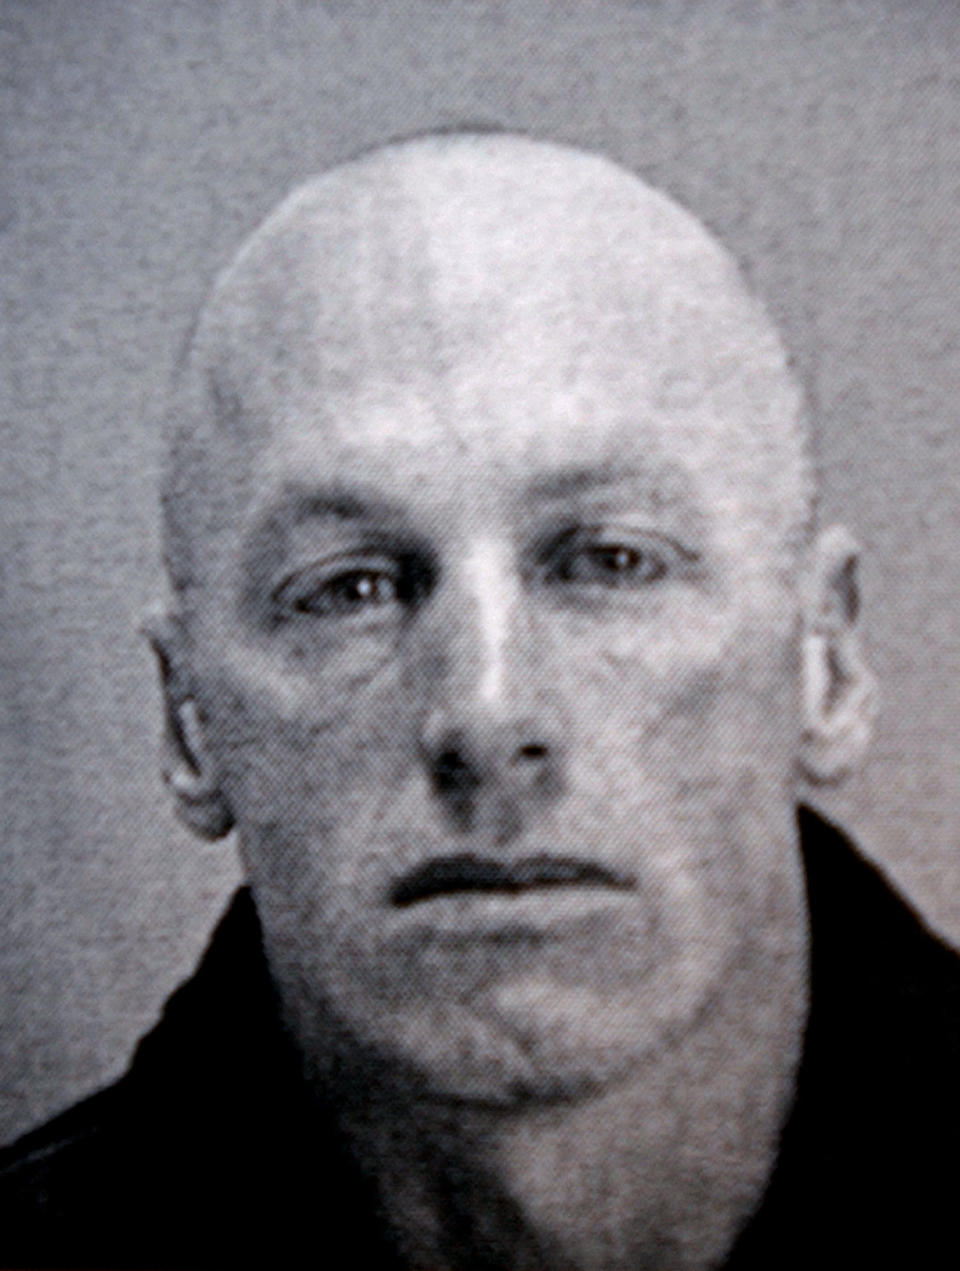 Santa Clara County Sheriffs released this booking photo of San Francisco 49ers quarterback Jeff Garcia in San Jose, Calif., Wednesday, Jan. 14, 2004. Garcia was arrested on suspicion of drunken driving after being pulled over by San Jose State University police near campus early Wednesday morning, a Santa Clara County Department of Correction spokesman said. (AP Photo/Santa Clara County Sheriff)